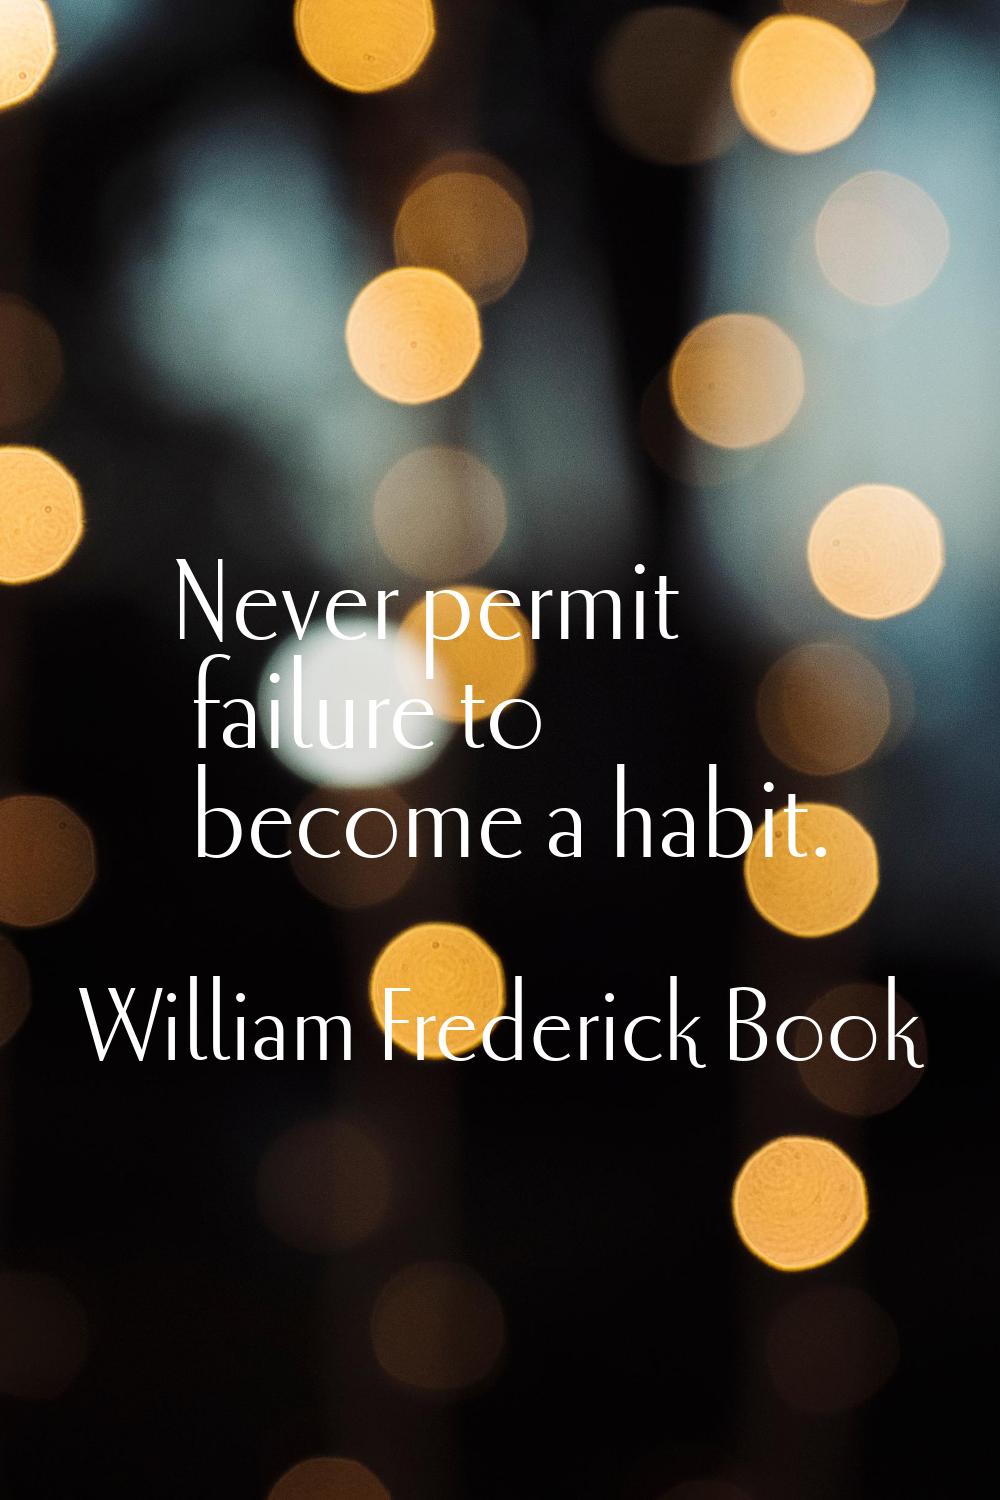 Never permit failure to become a habit.